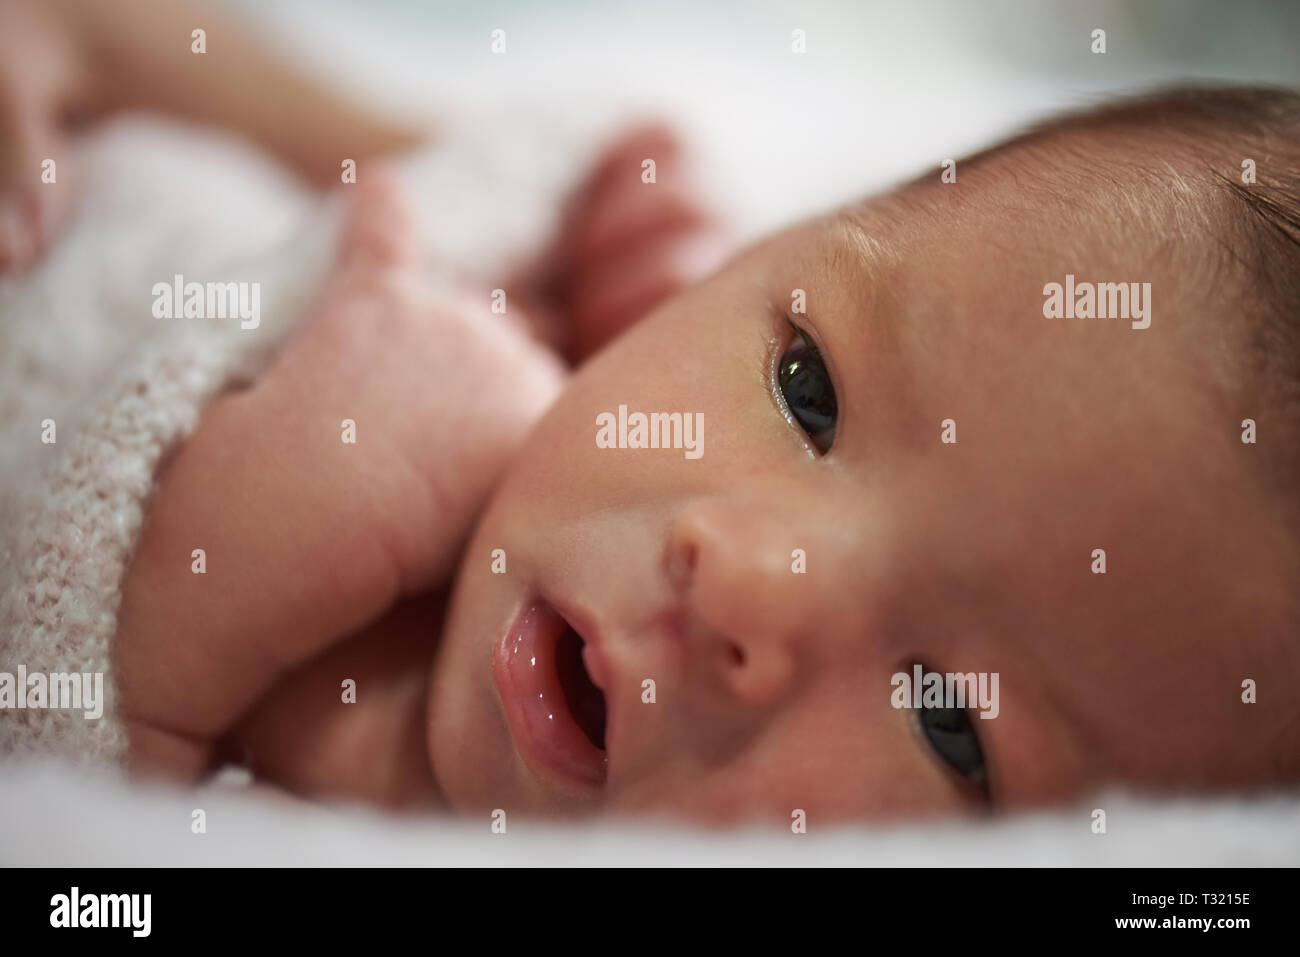 Close-up portrait of newborn baby with open eyes Stock Photo